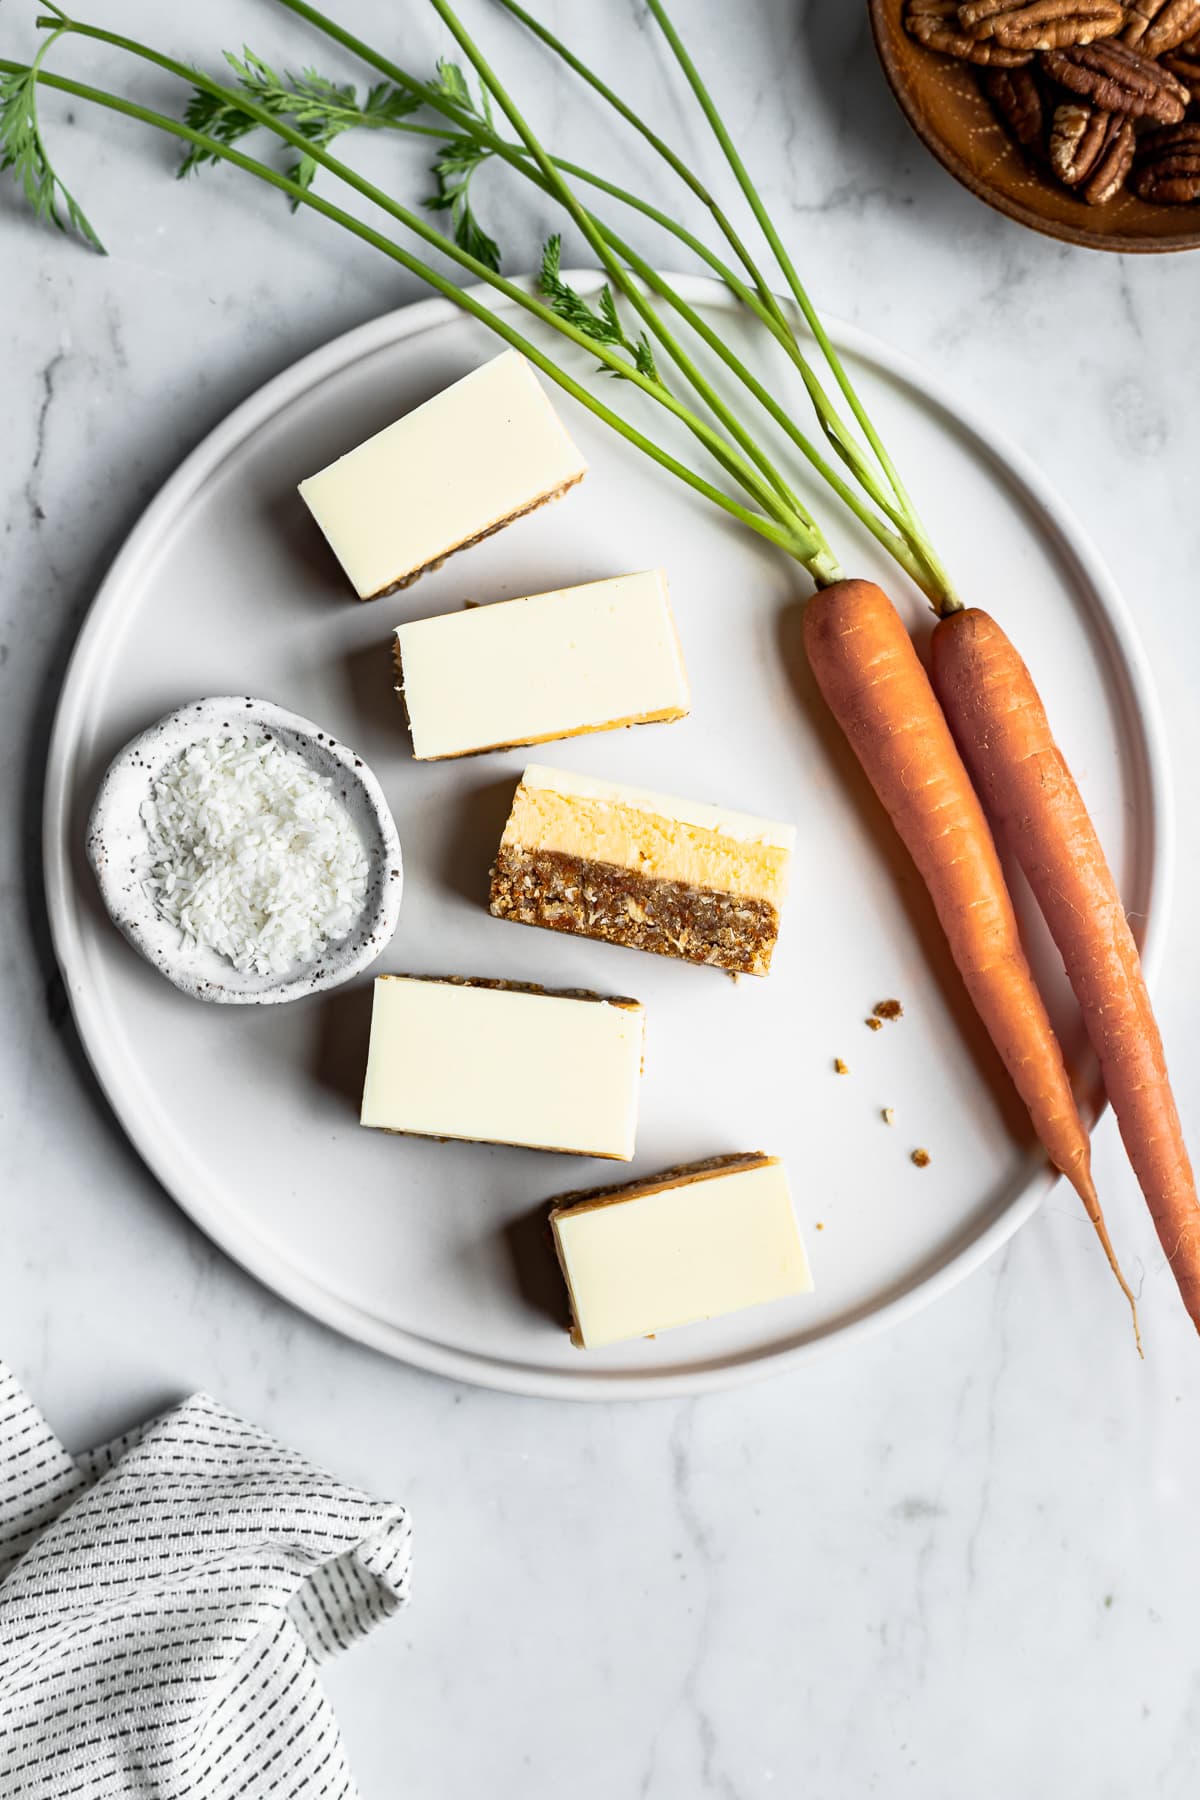 Sliced bar cookies on a white plate surrounded by carrots, a bowl of coconut and a bowl of pecans on a white marble background